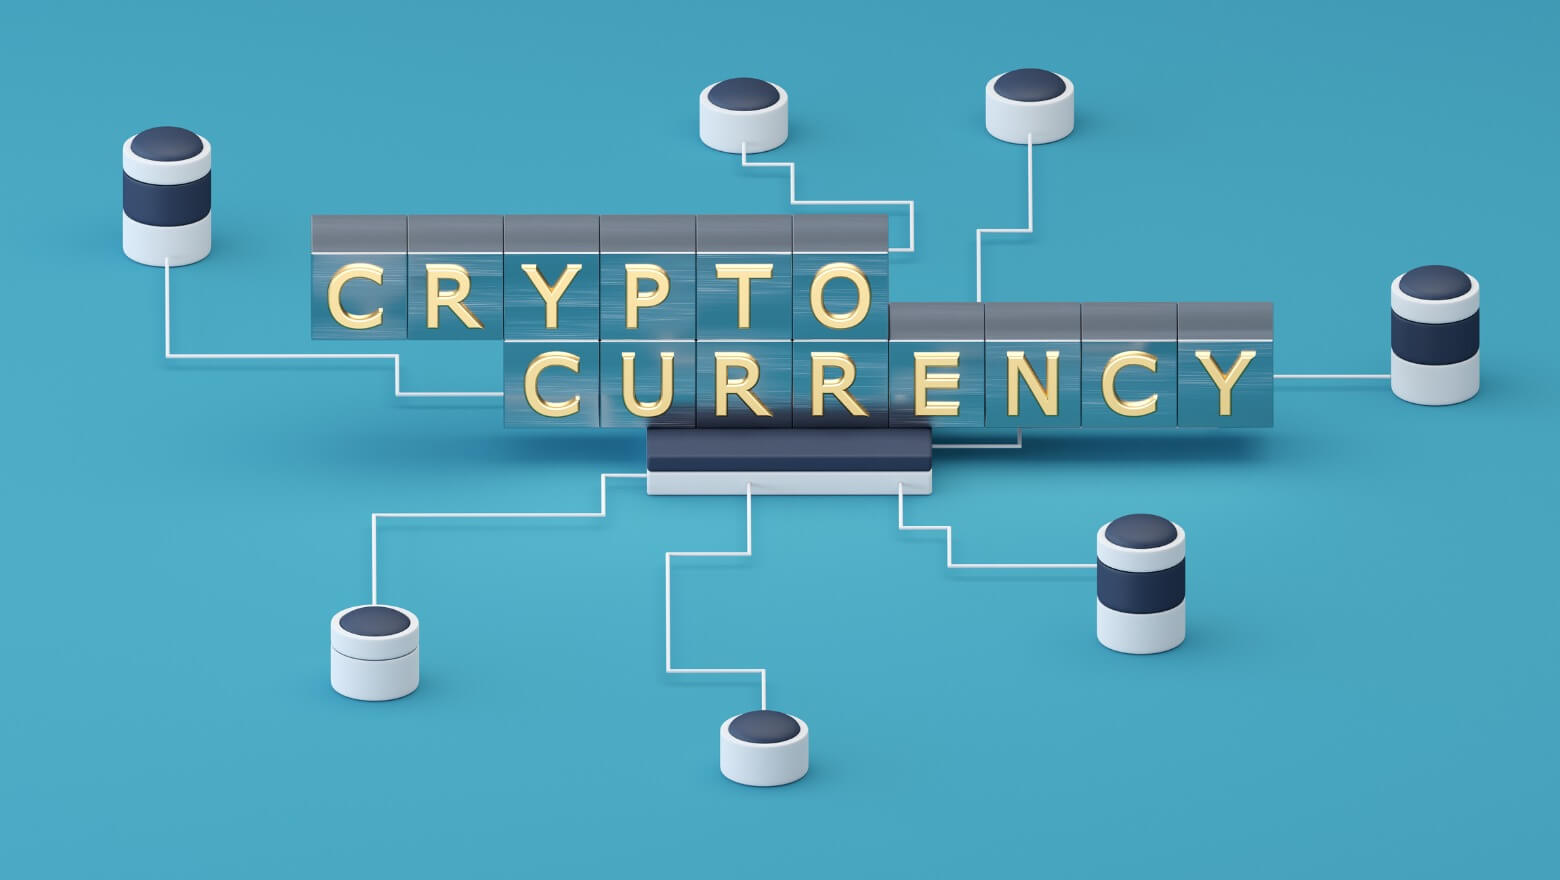 A cryptocurrency works decentralized.